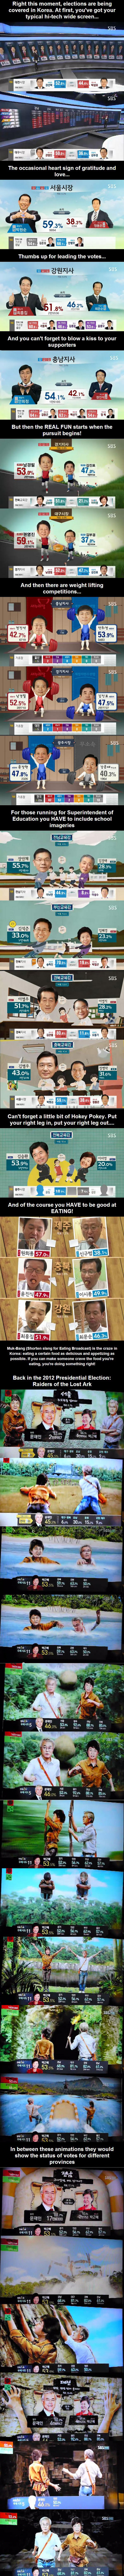 this is why south korean election broadcasts are so fun to watch, news